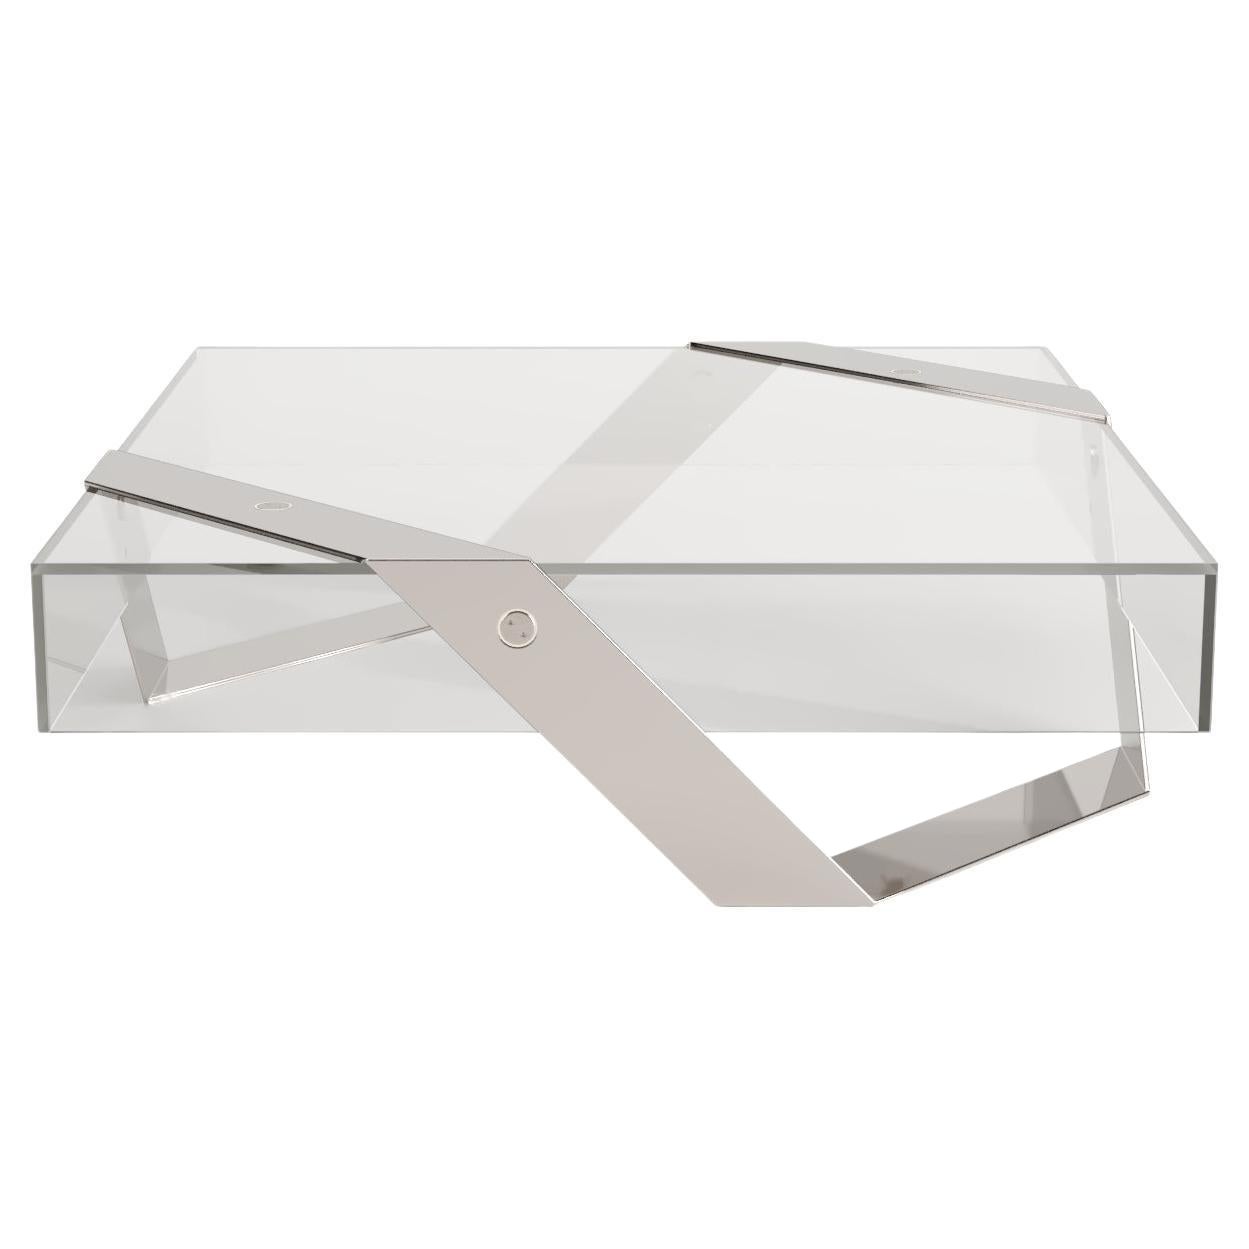 Modern Minimalist Square Center Coffee Table Glass and Polished Stainless Steel